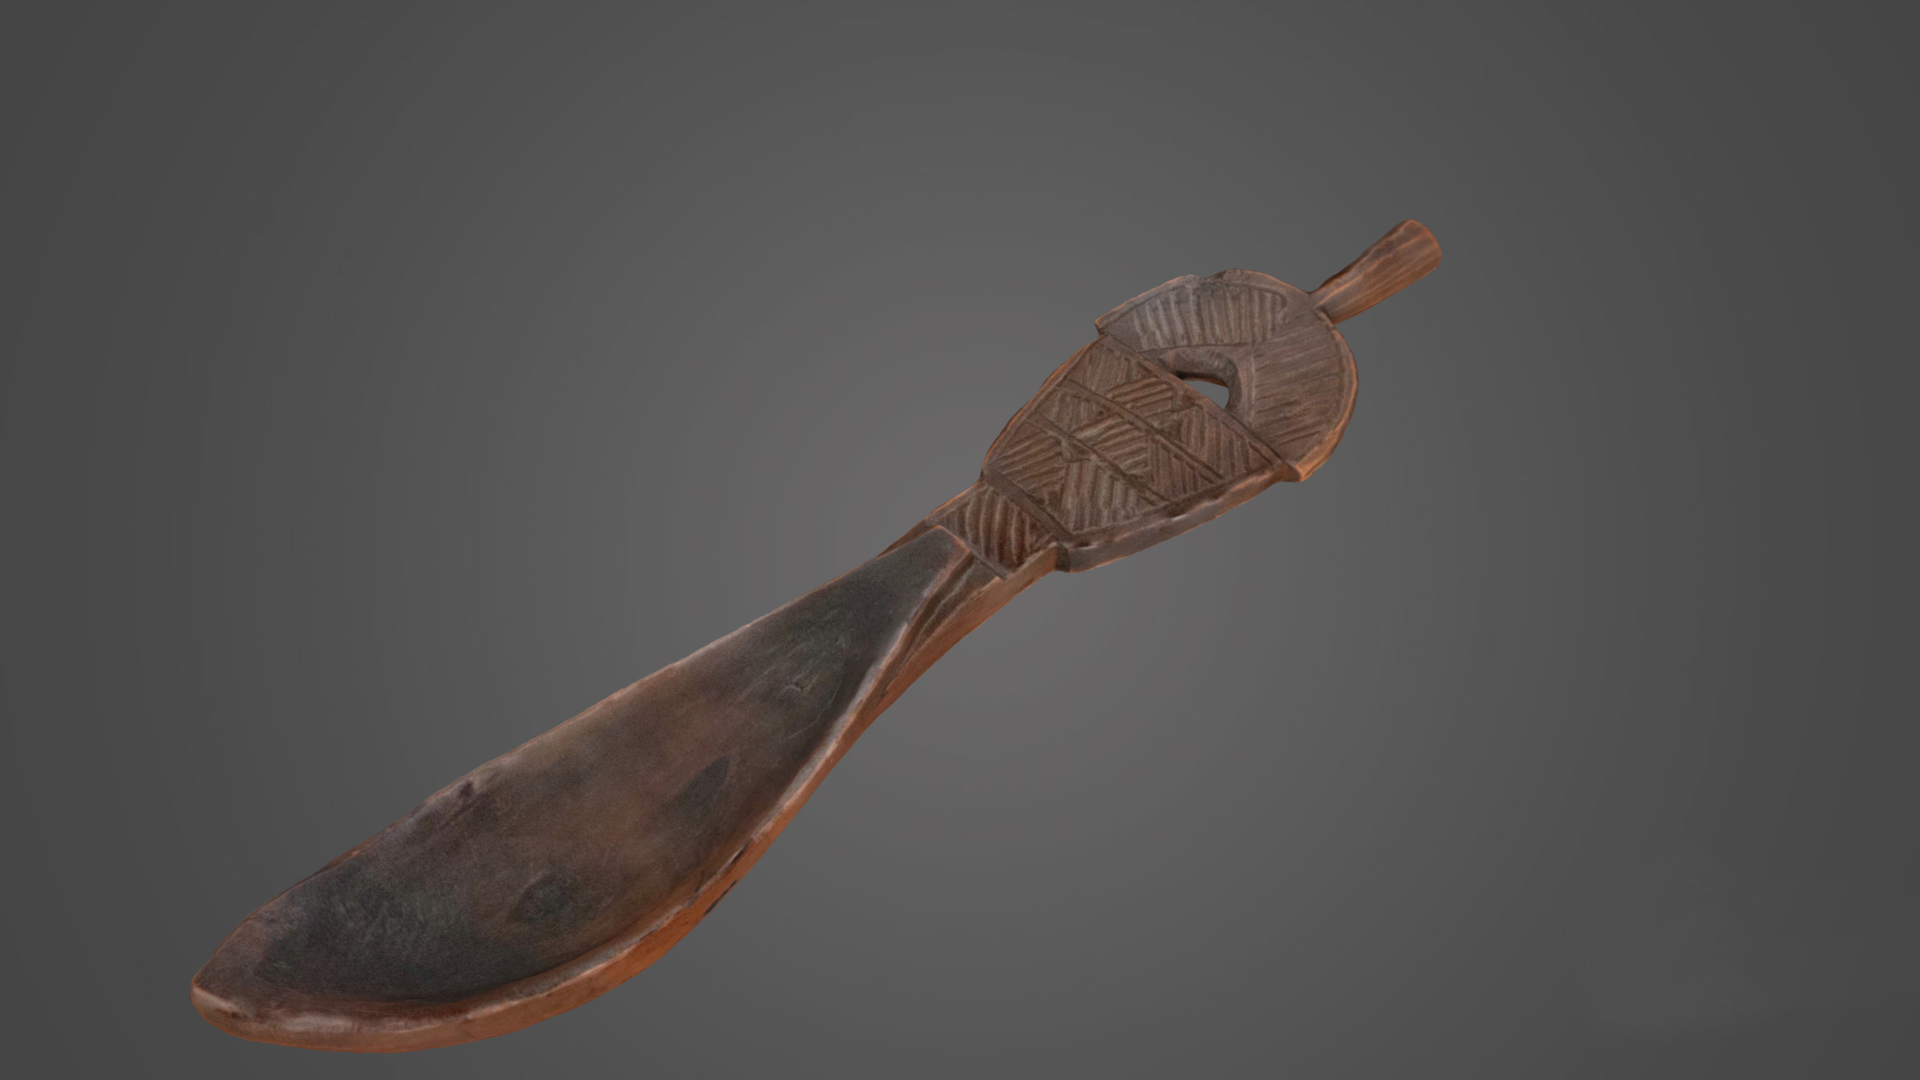 3D Scan of an Aweer Wooden Spoon